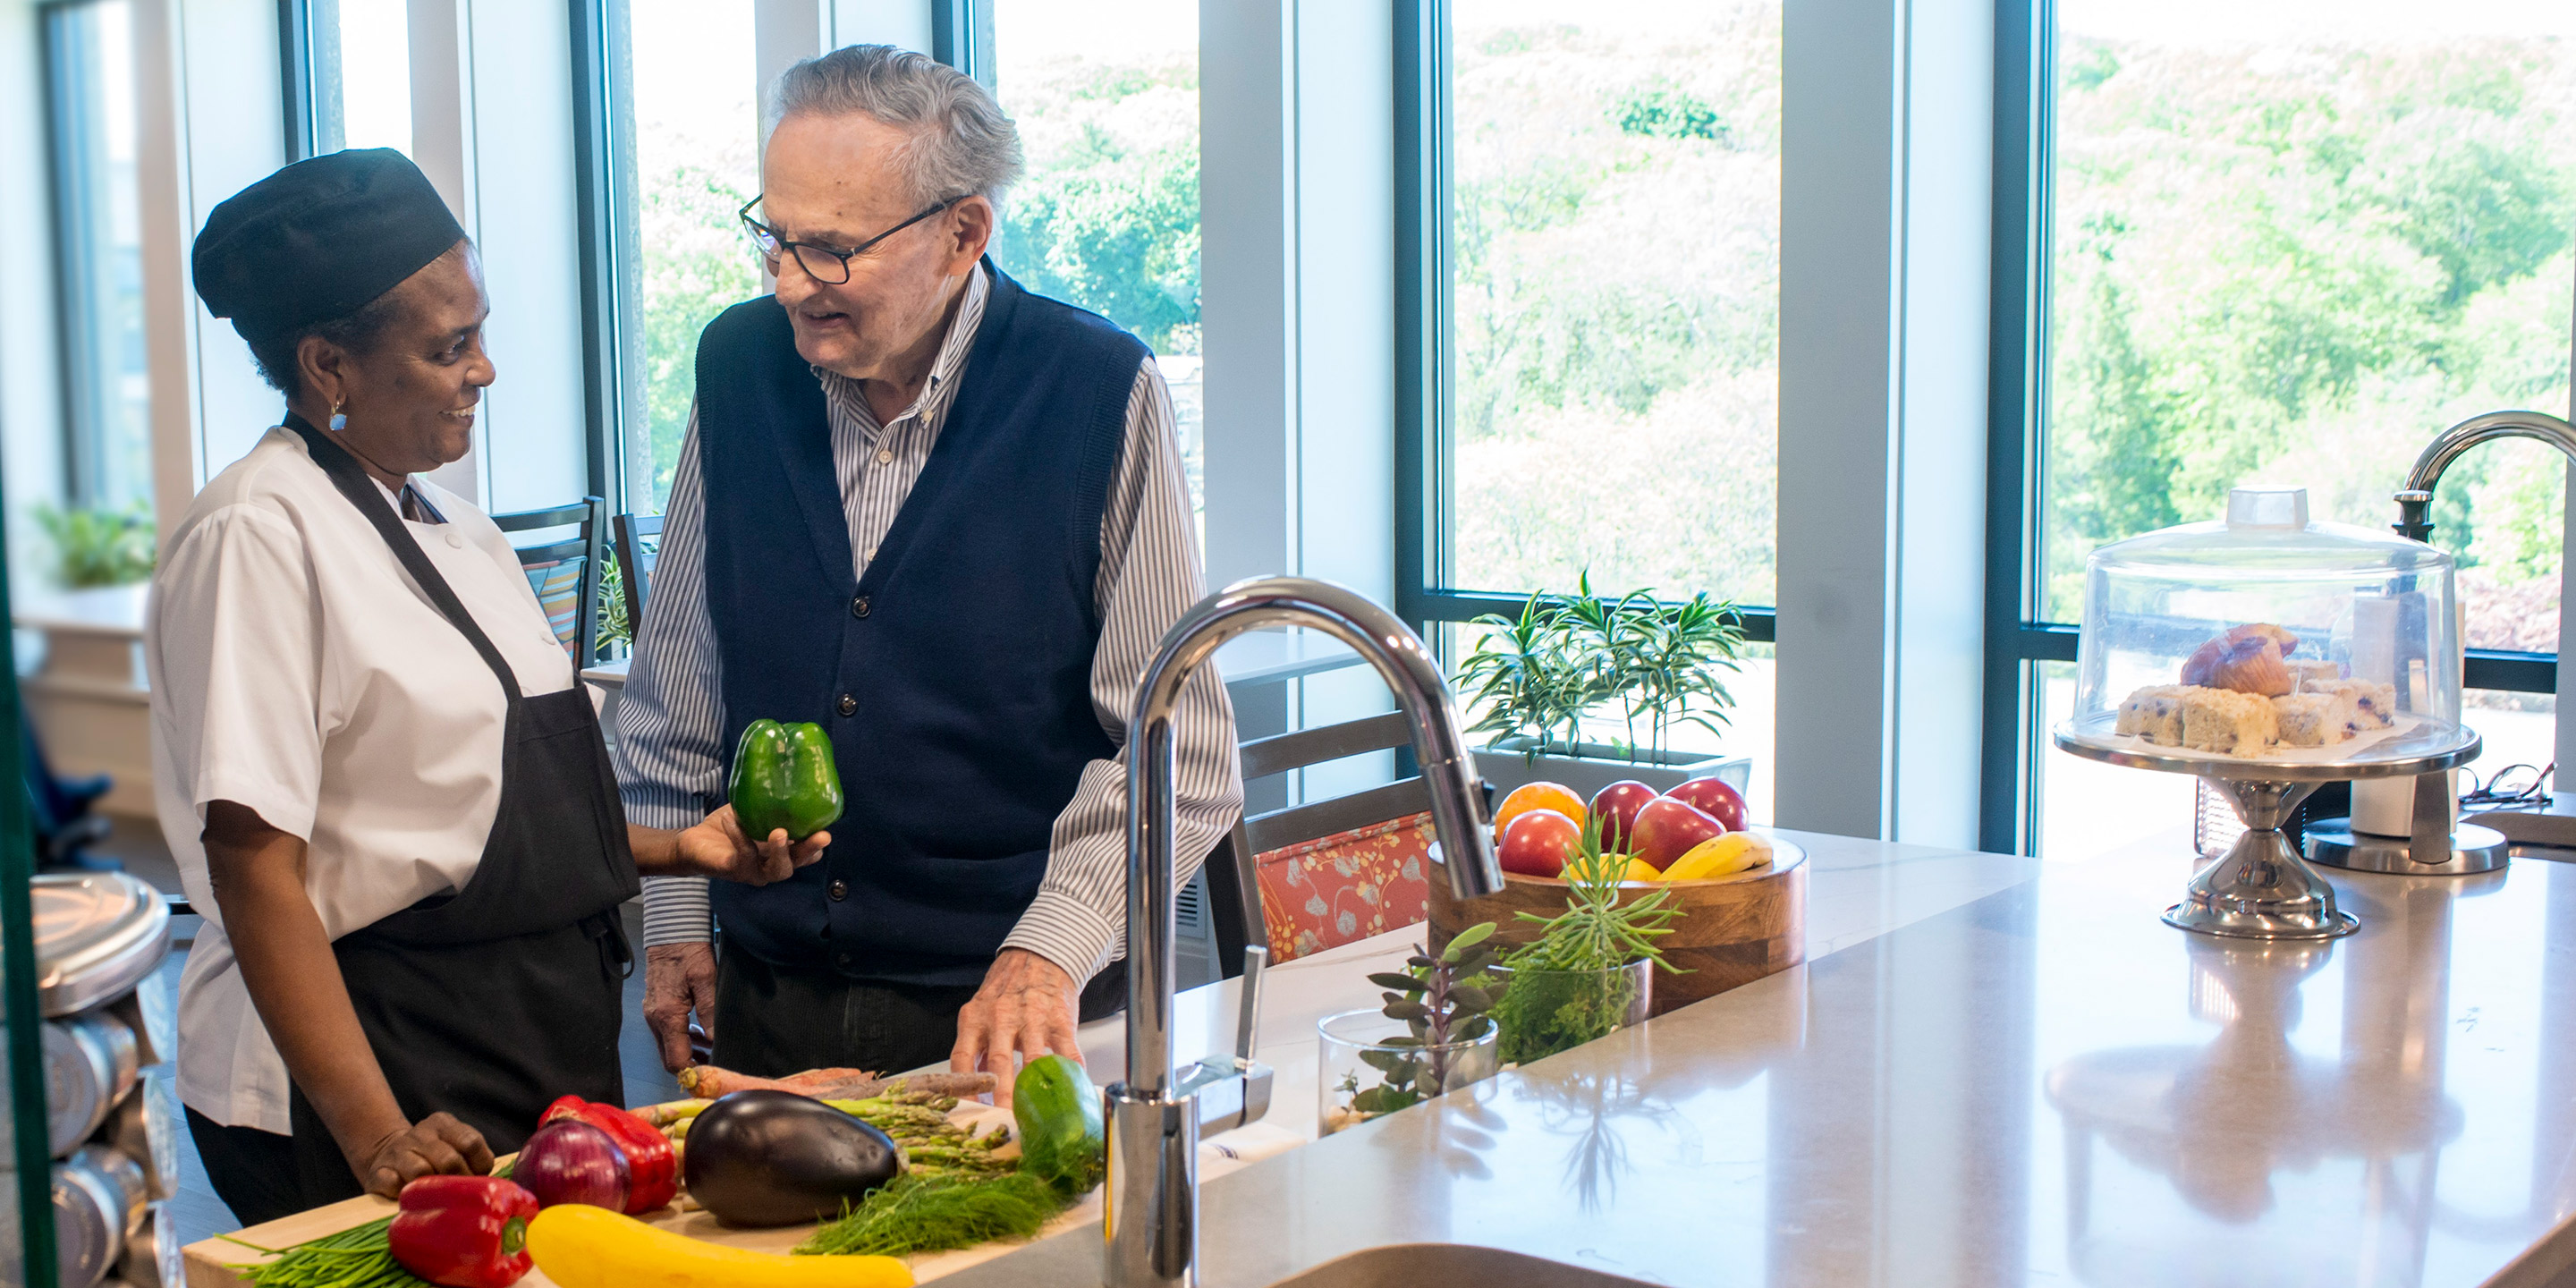 A male patient stands in the kitchen of his household at Hebrew Rehabilitation Center in Boston. A female member of the culinary team stands next to him, holding a green pepper. In front of them there are a variety of colorful fruits and vegetables on the counter. They are looking at each other and smiling.